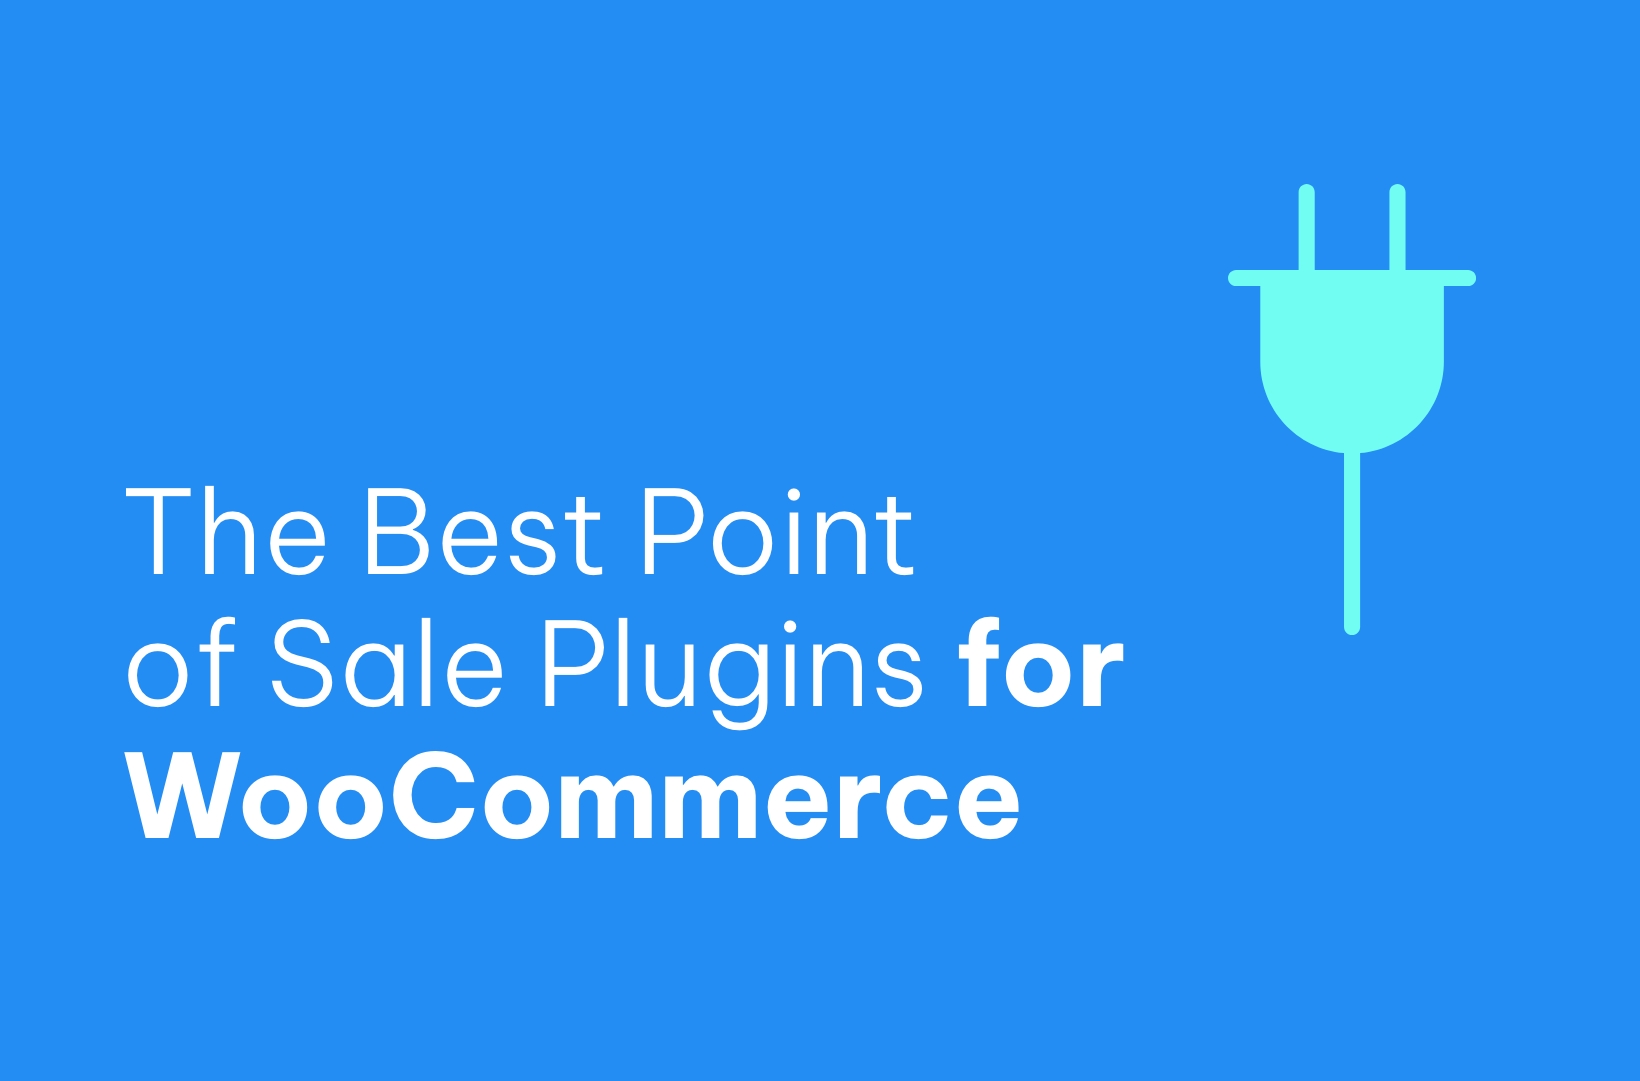 The Best Point of Sale Plugins for WooCommerce